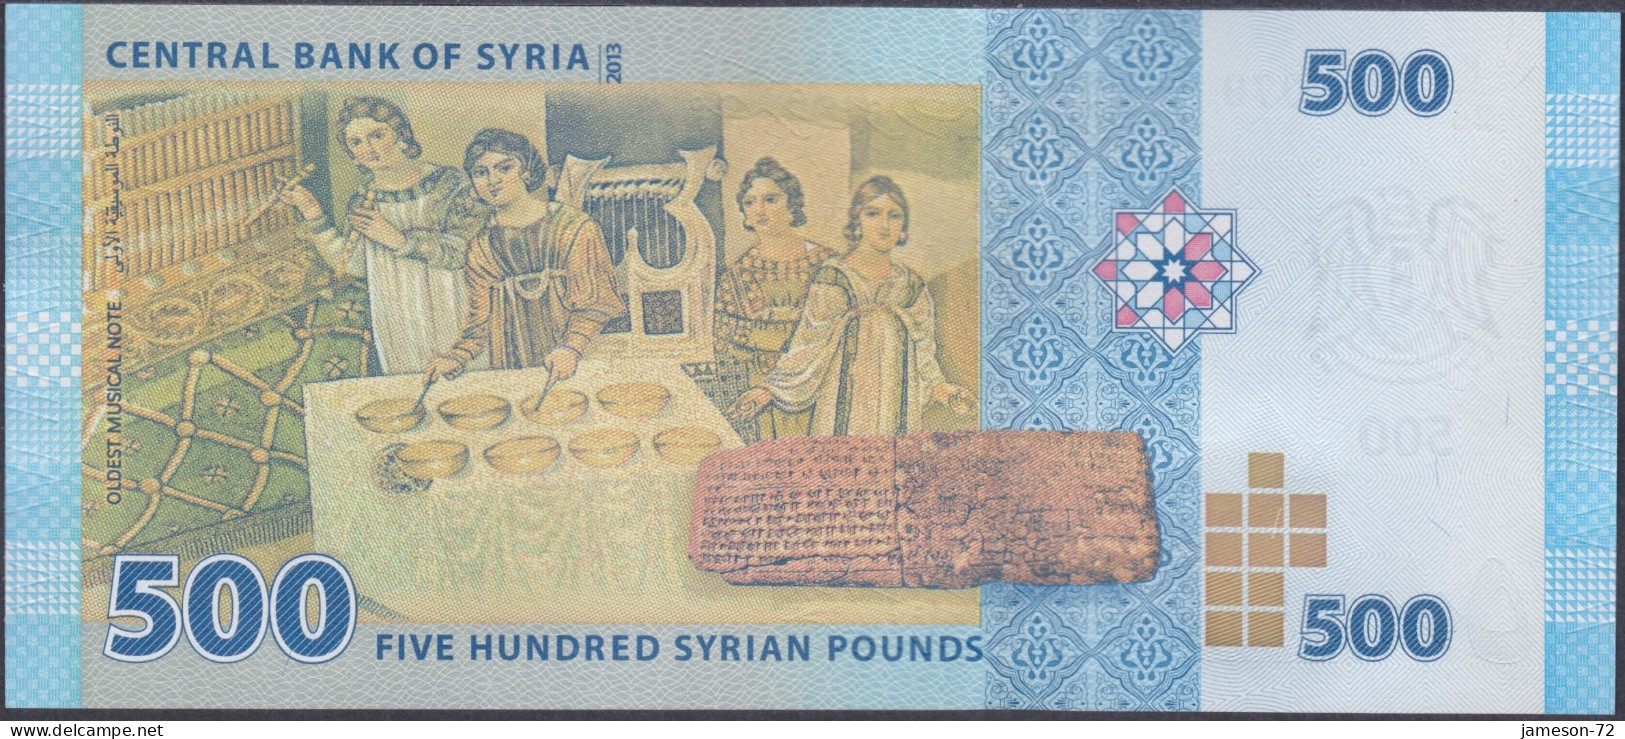 SYRIA - 500 Pounds AH1434 2013AD P# 115 Middle East Banknote - Edelweiss Coins - Syrien